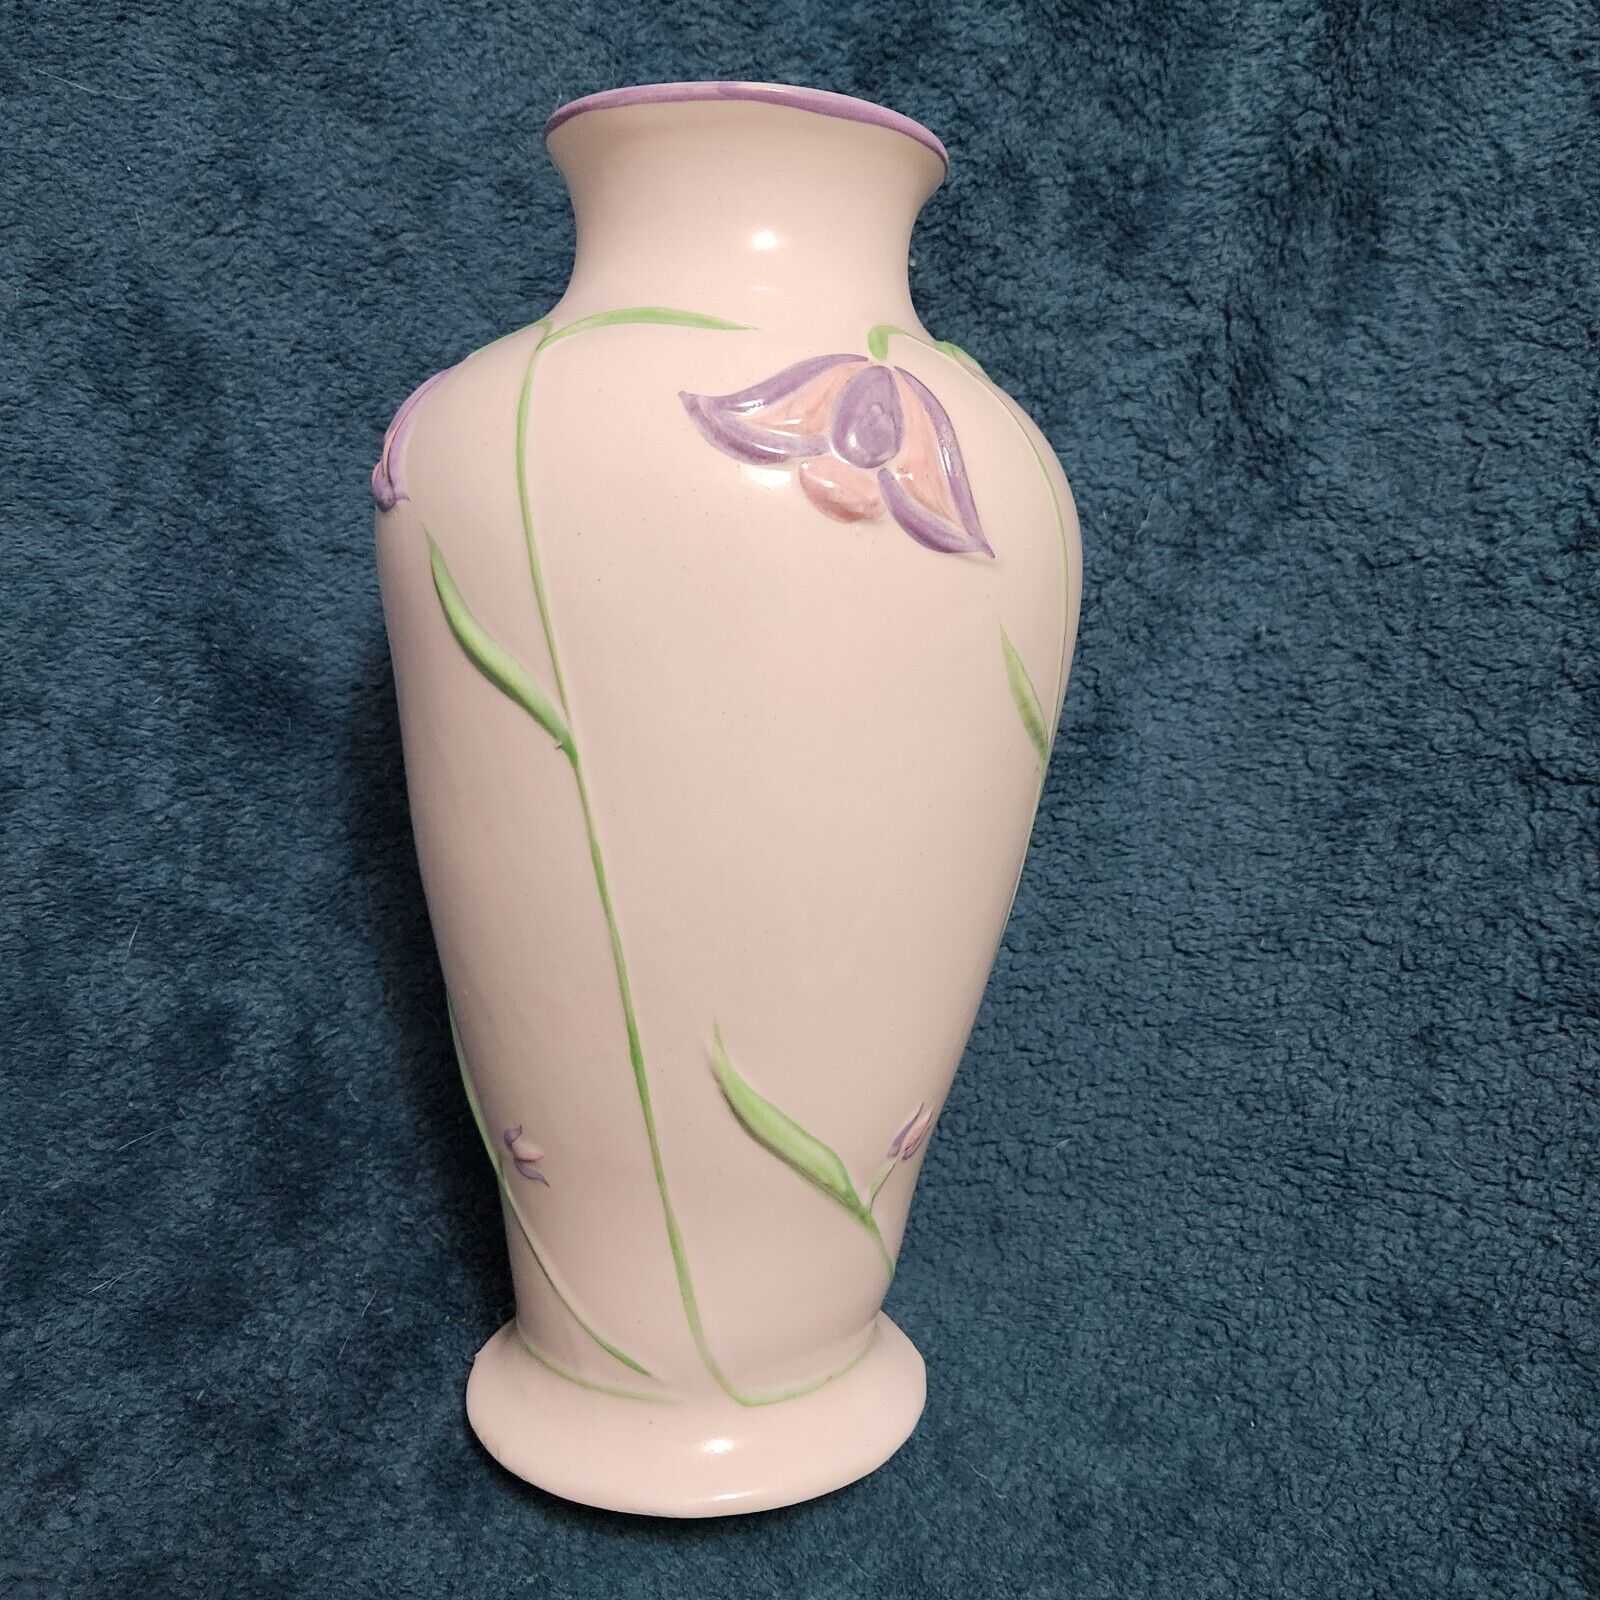 Exquisite Handcrafted Flower Porcelain Vase by Artisan Grebow